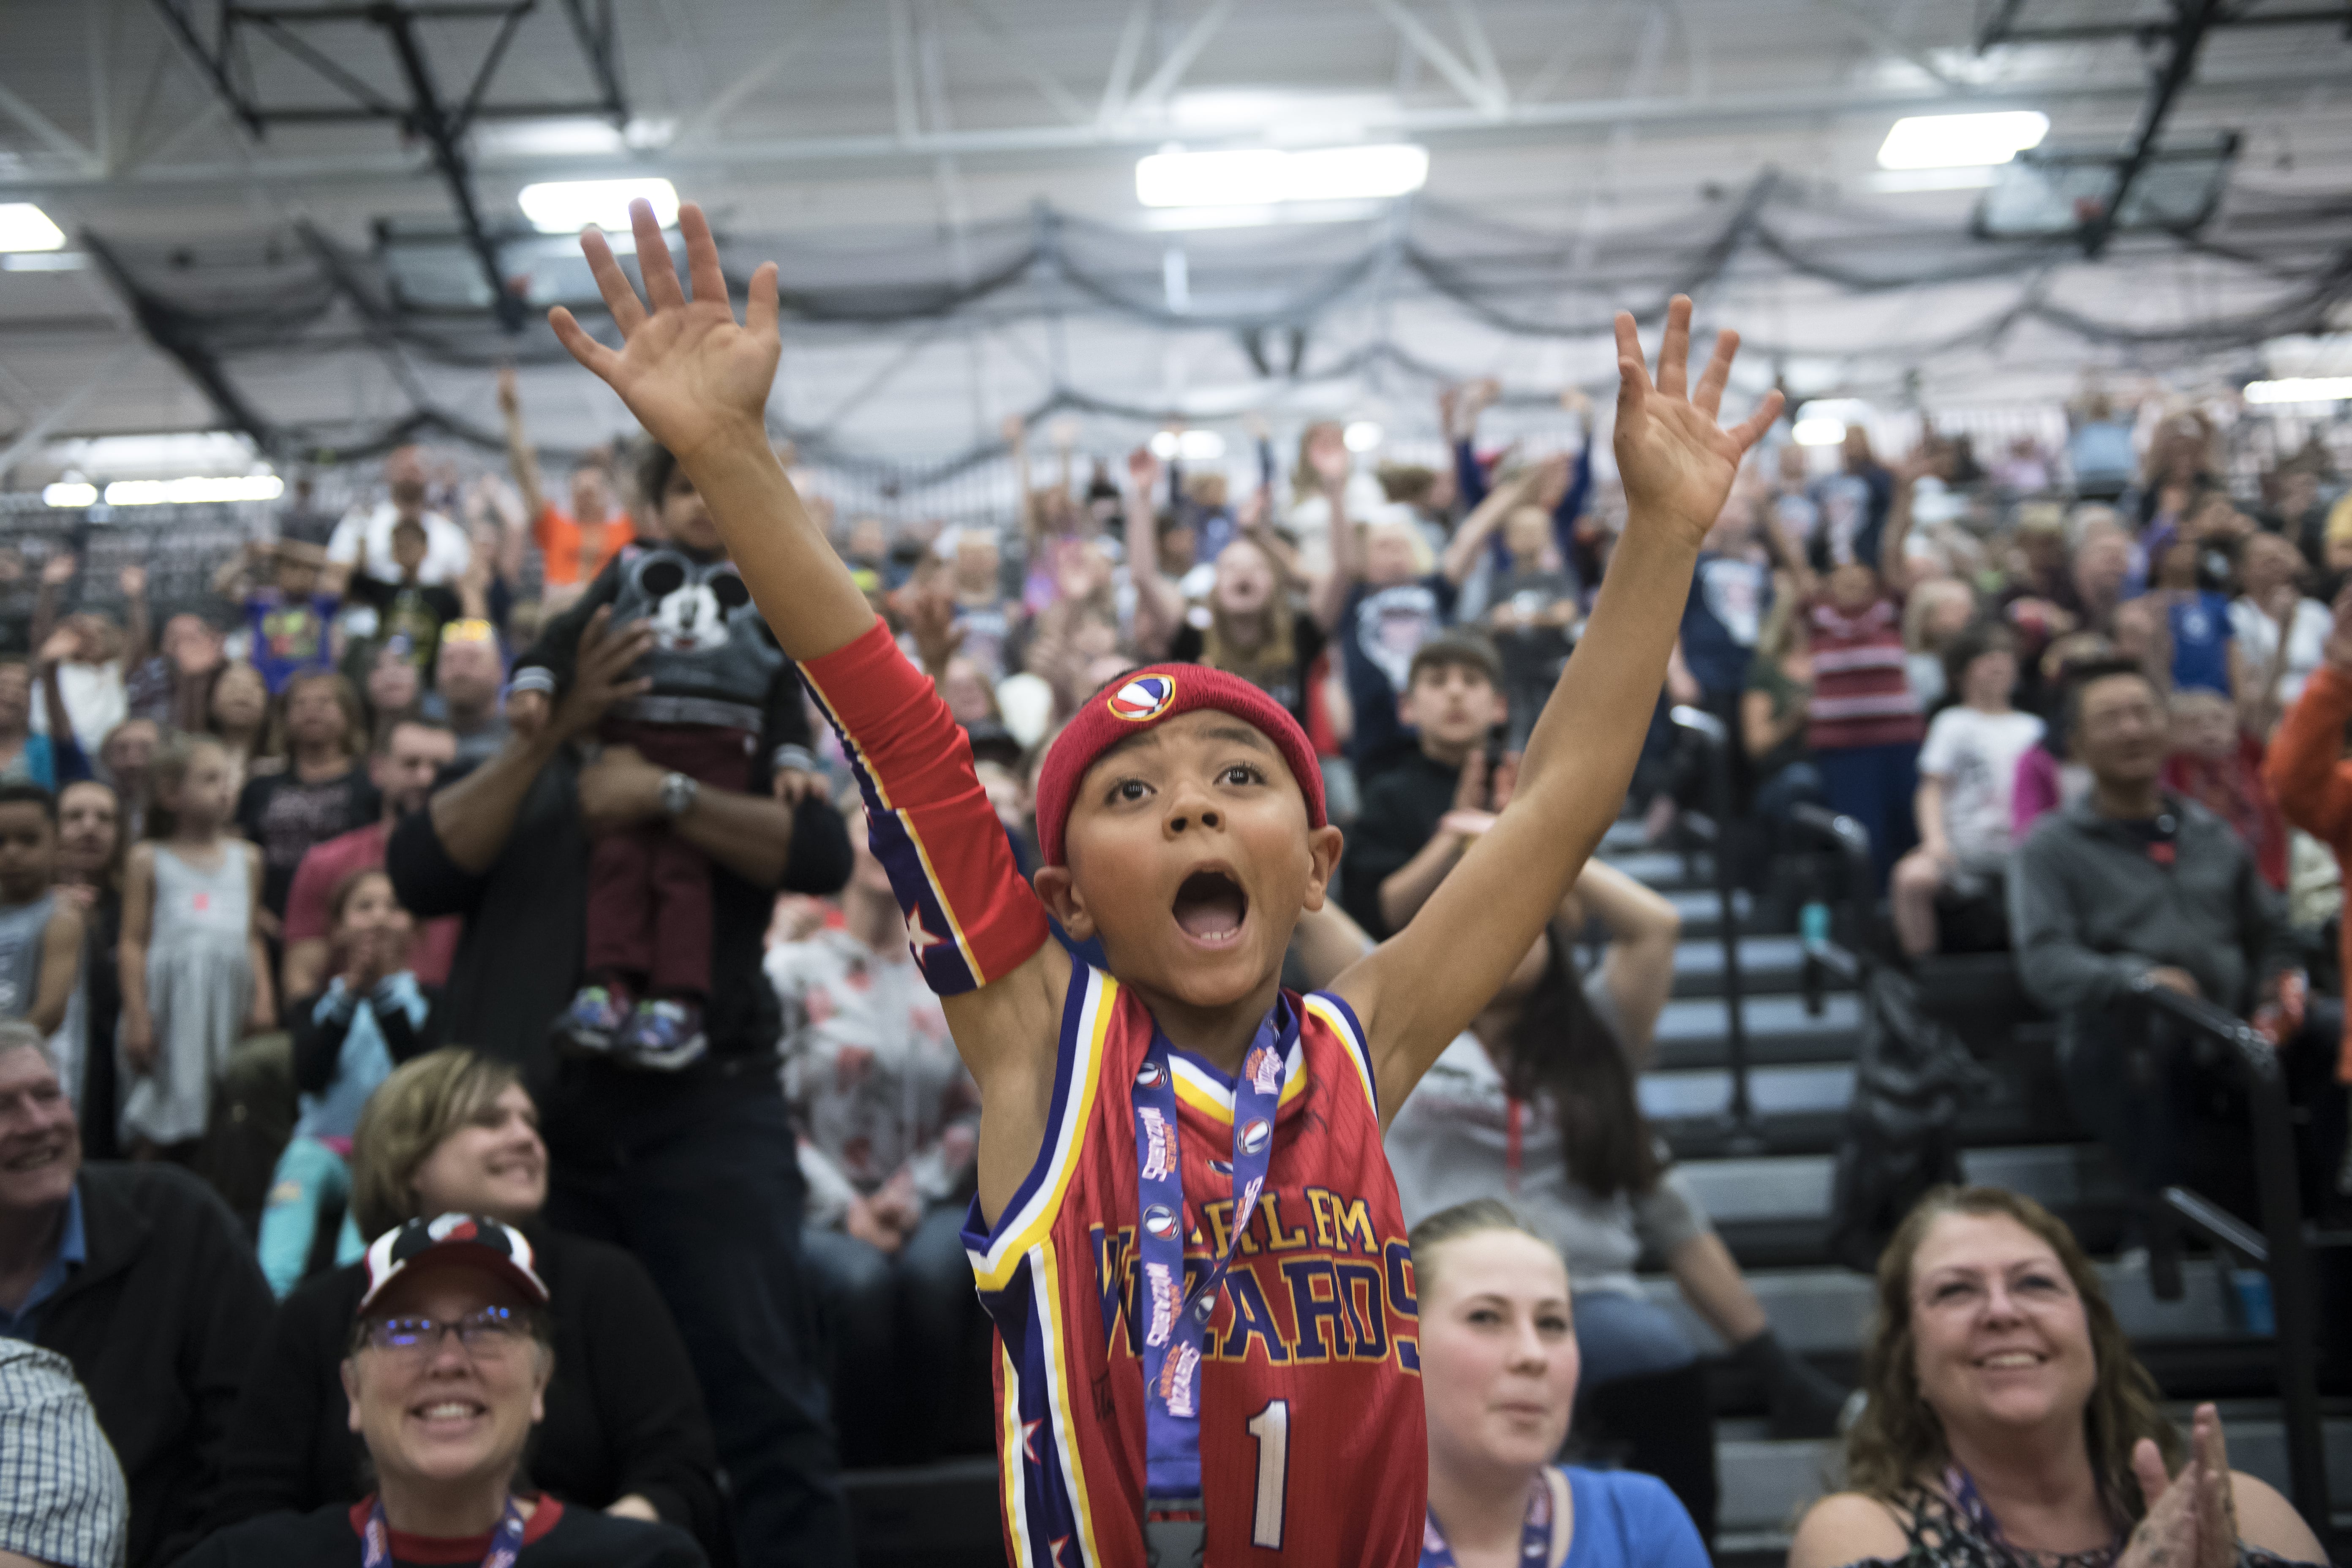 Gallery: Harlem Wizards at Union High